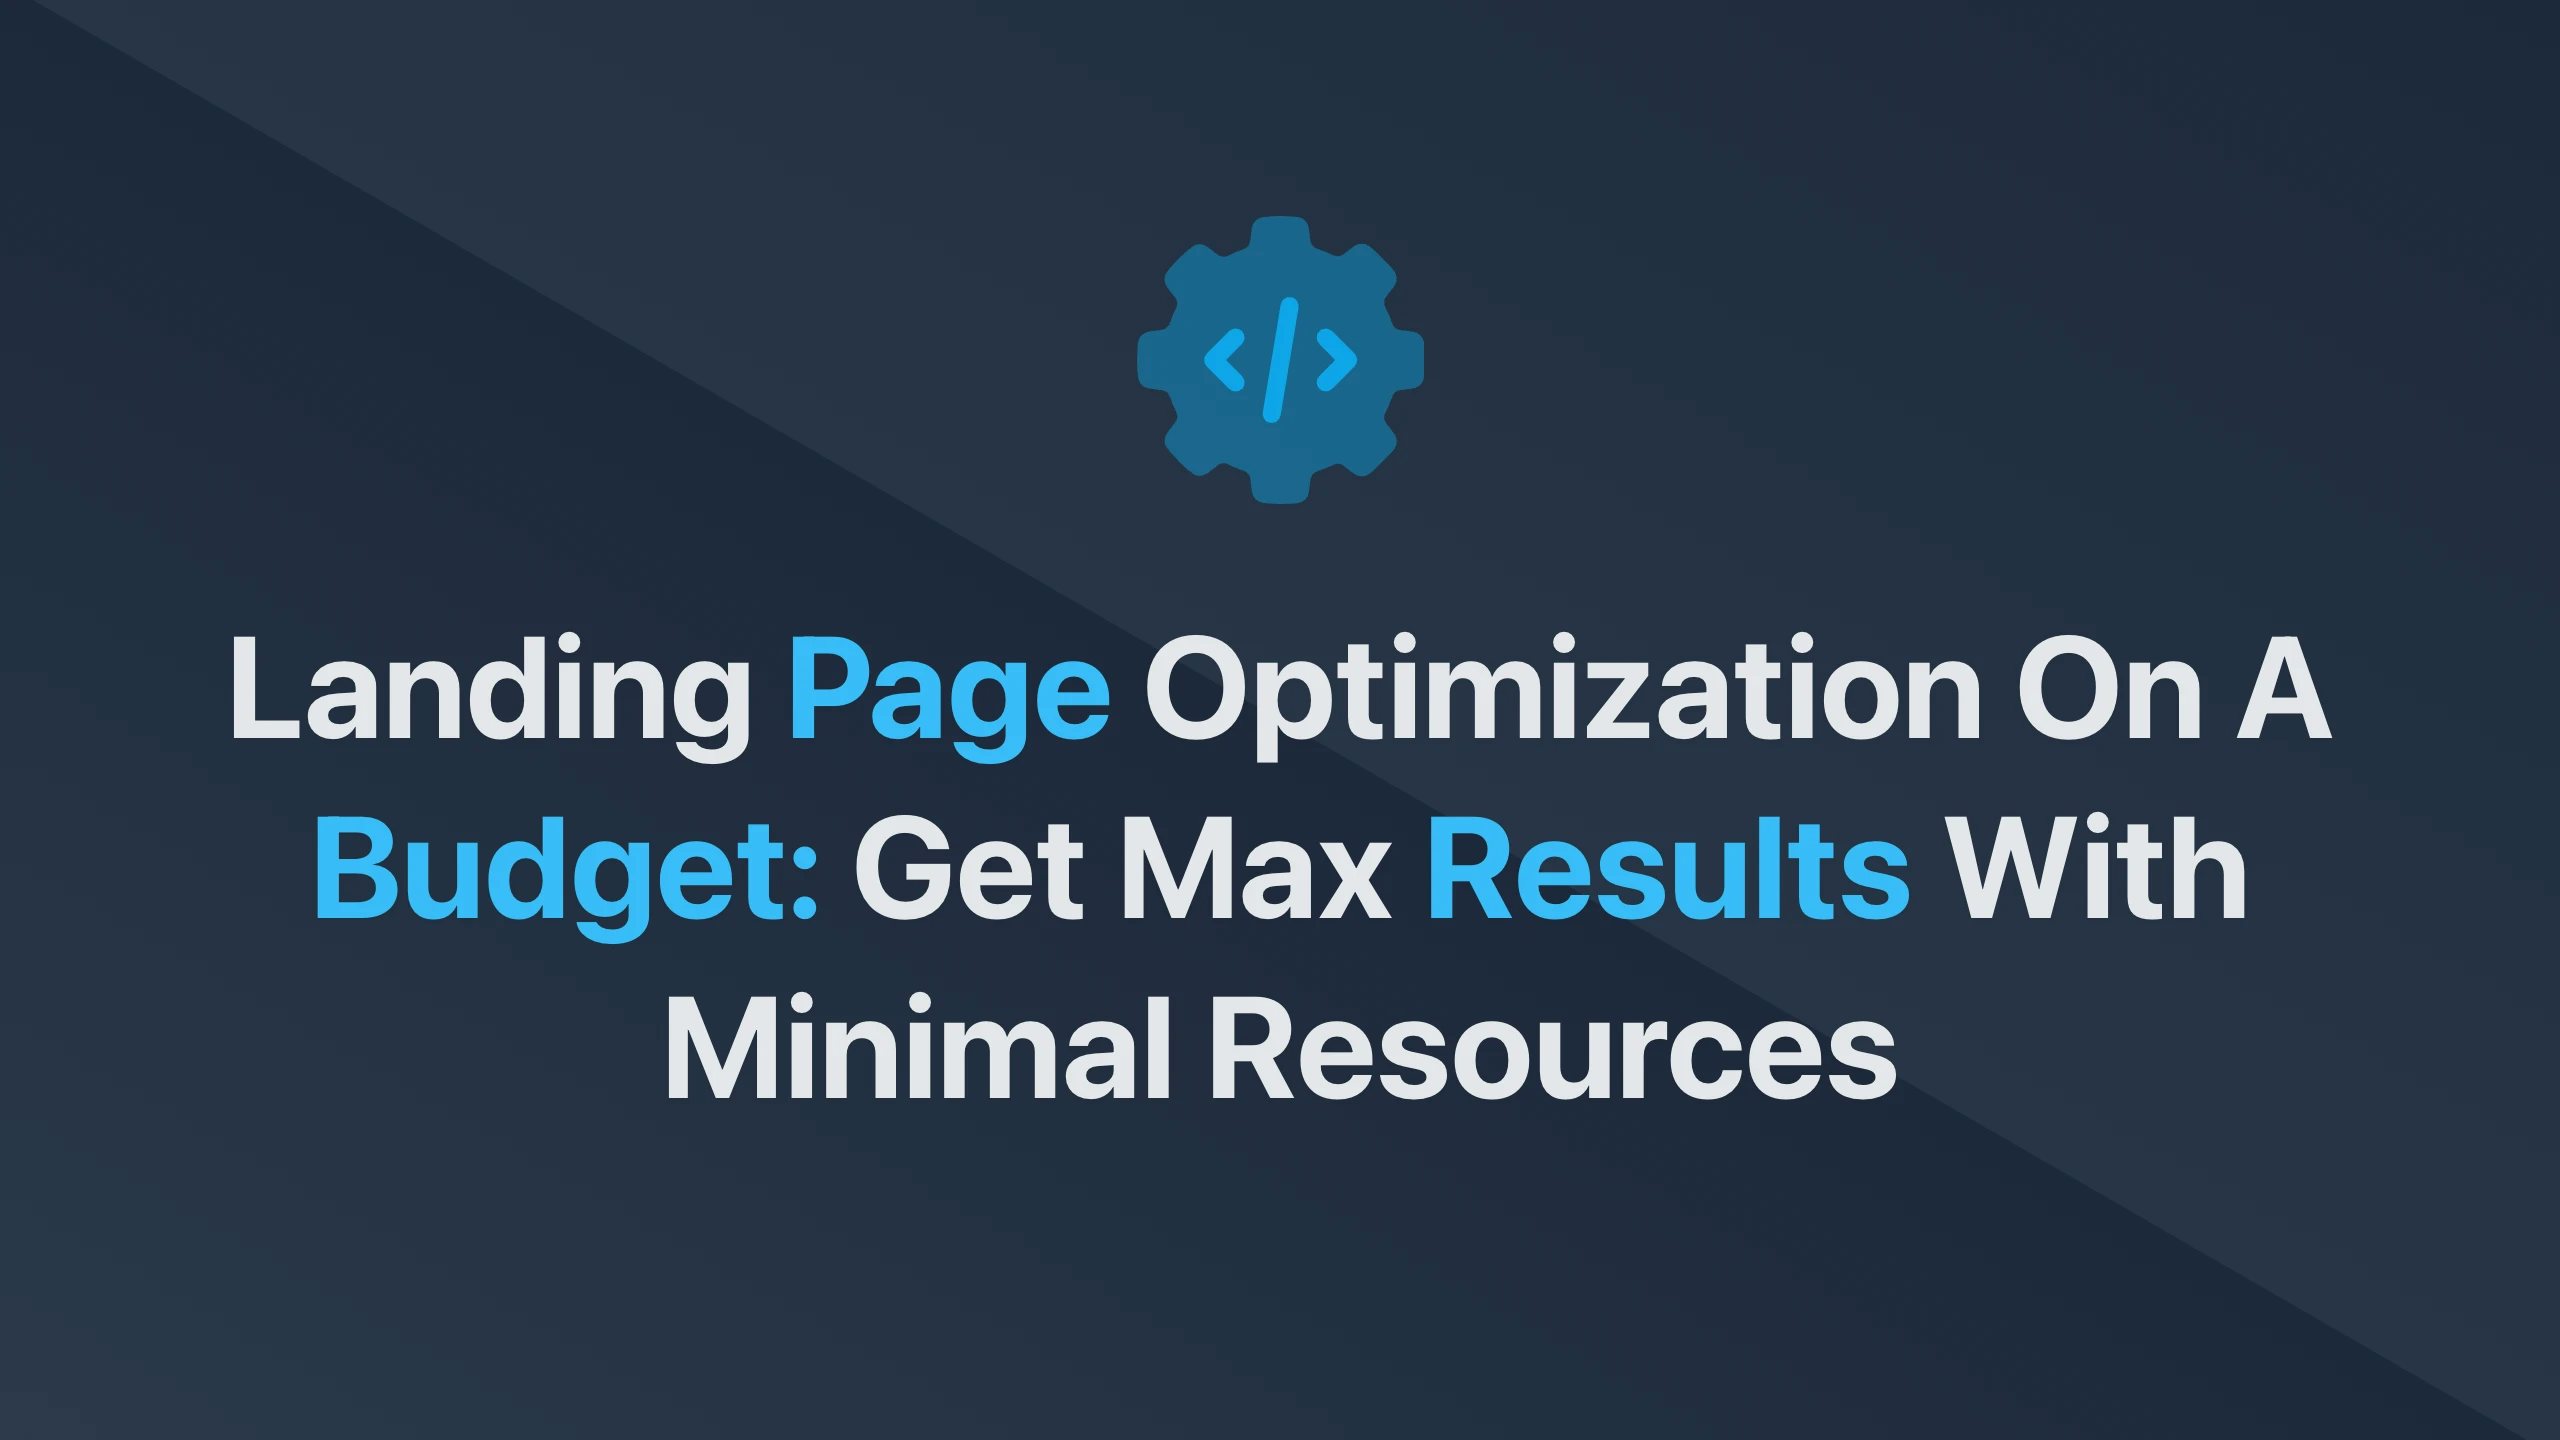 Cover Image for Landing Page Optimization on a Budget: Get Max Results with Minimal Resources